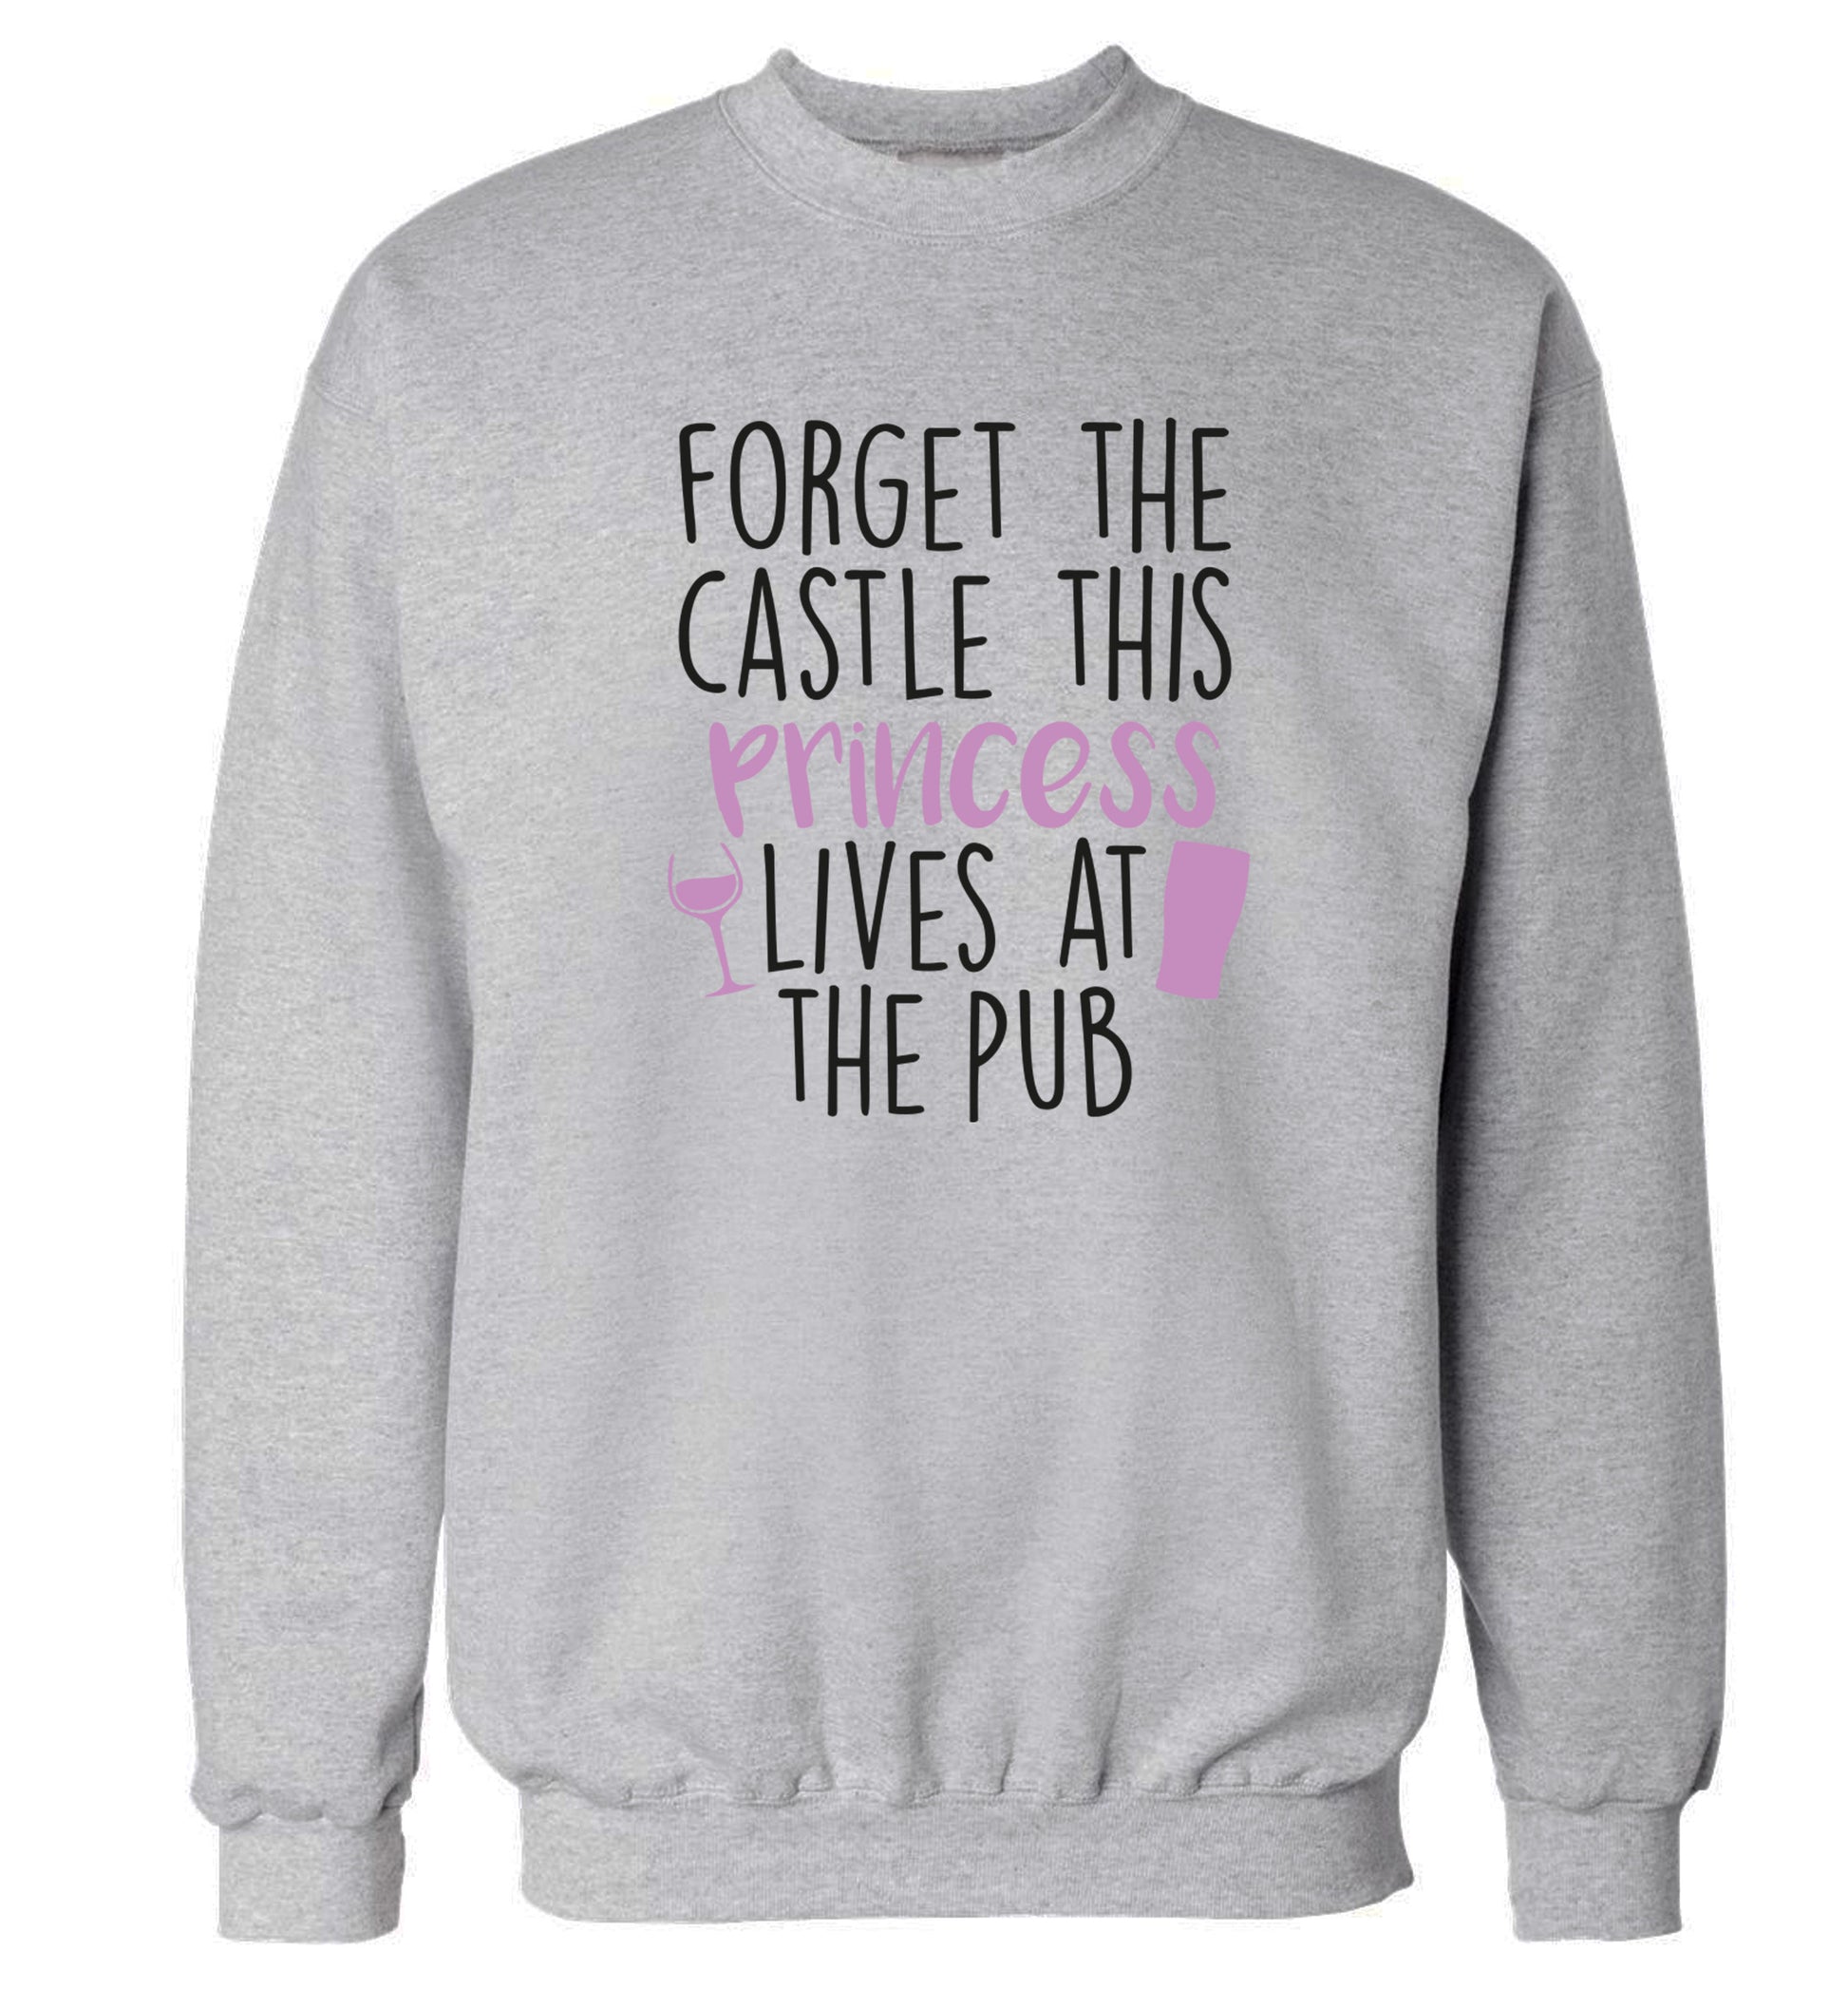 Forget the castle this princess lives at the pub Adult's unisex grey Sweater 2XL